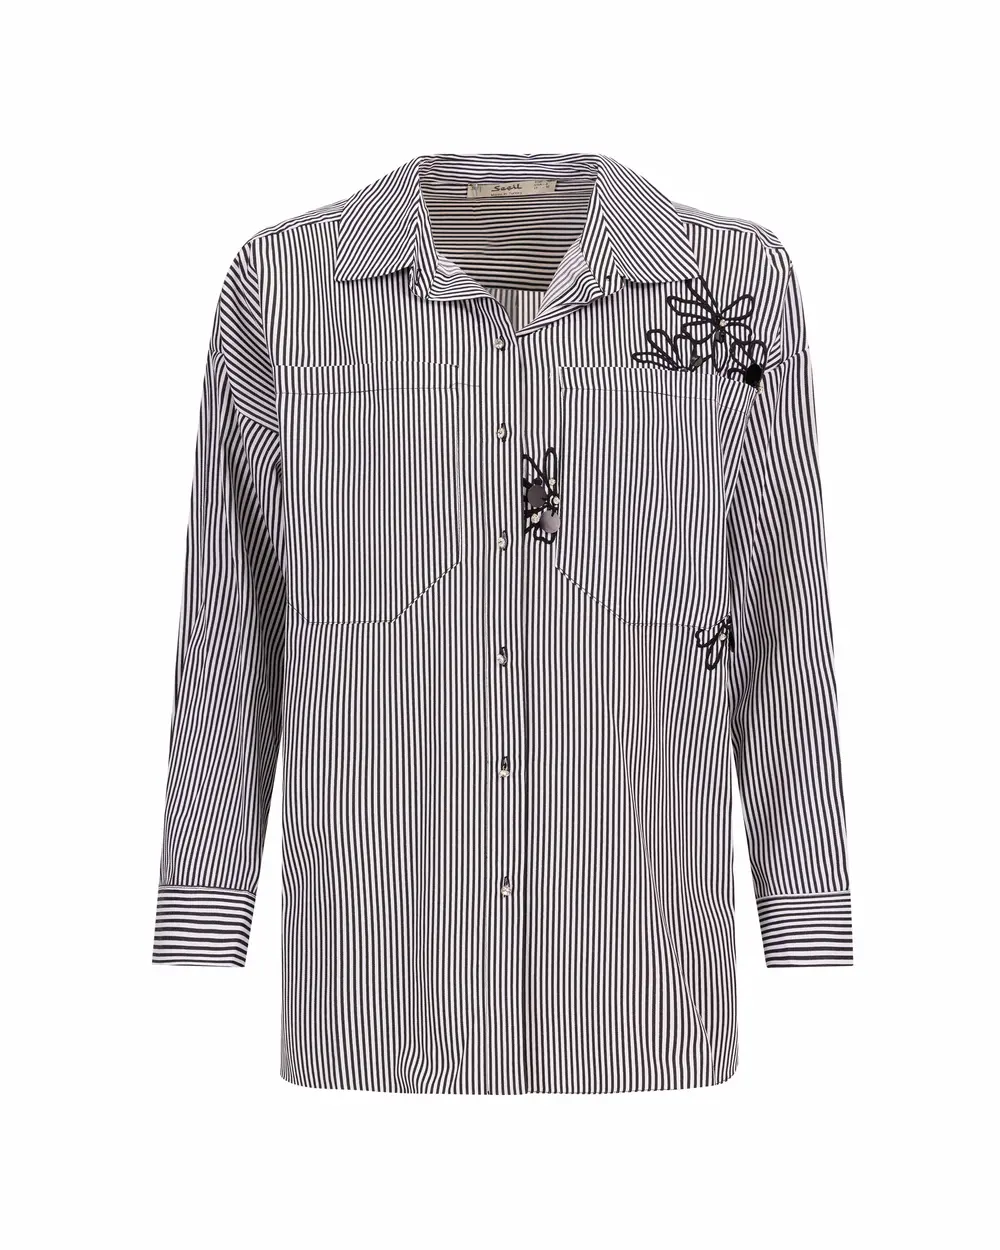 Embroidered Sequined Line Pattern Shirt